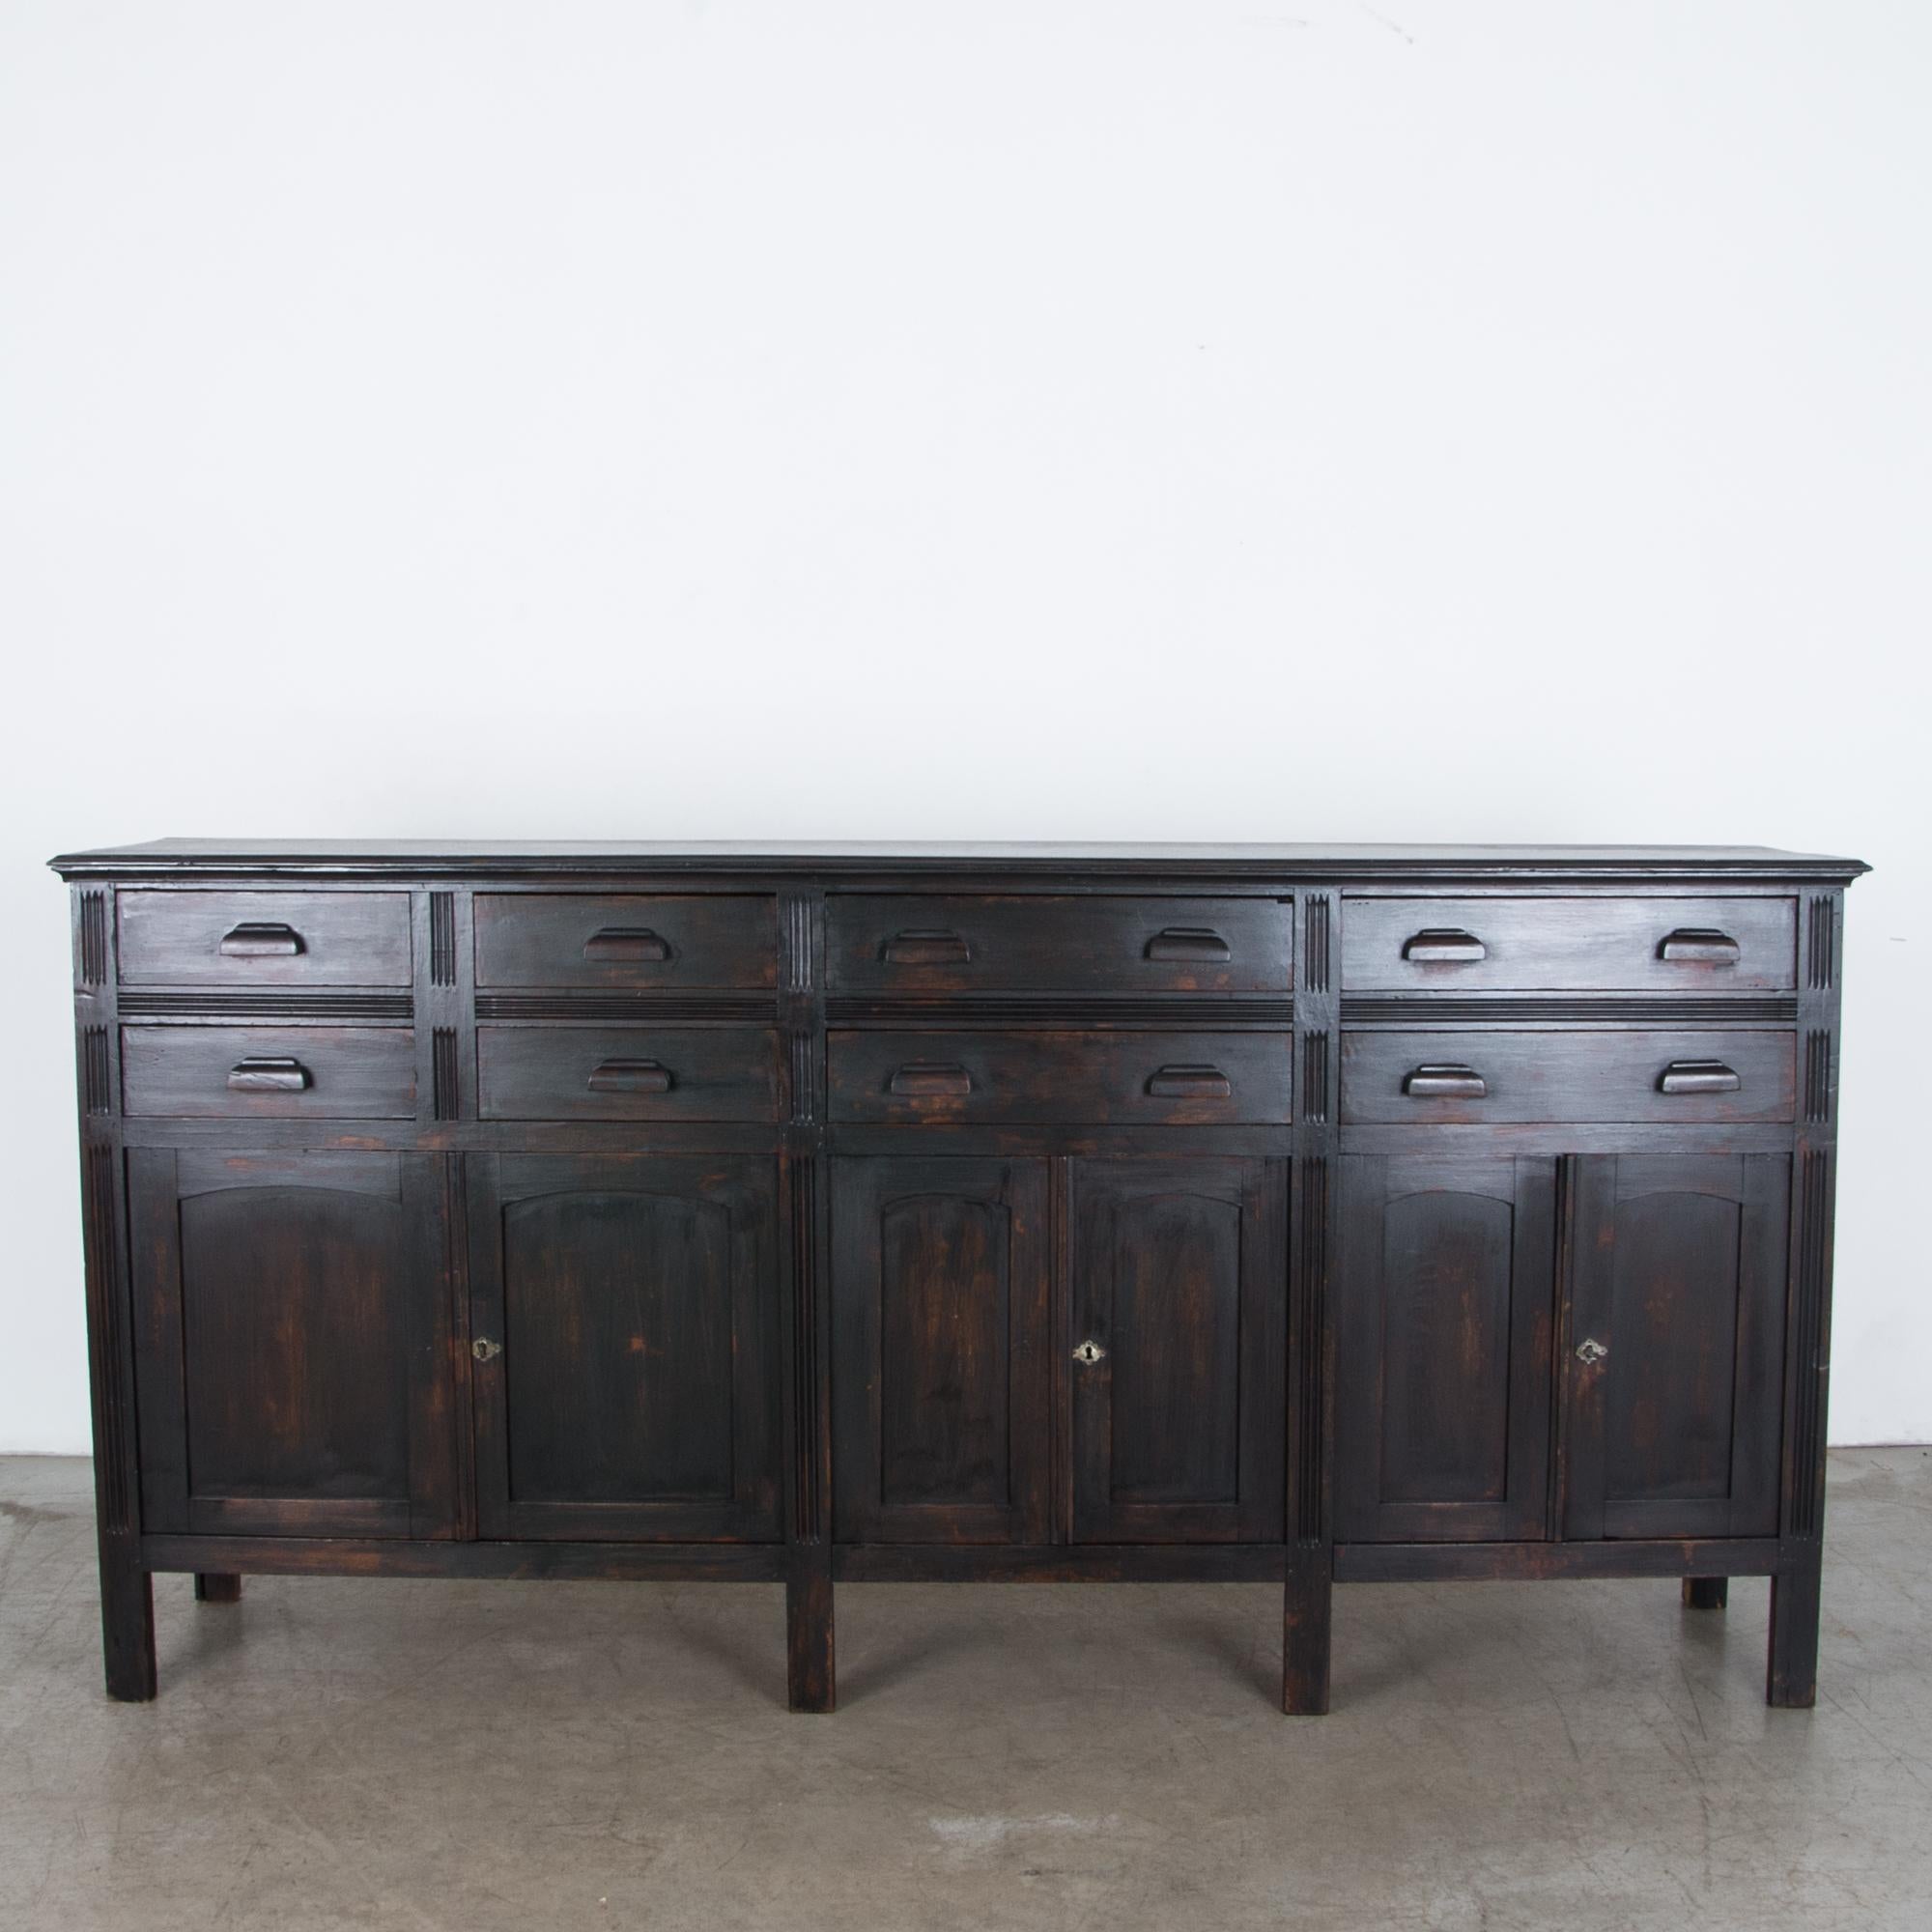 Produced in Belgium circa 1910, this spacious six door storage cabinet features interior dividers and a double row of drawers. A refined construction is simple and direct, with a subtle geometric carved frame. Constructed from durable old growth